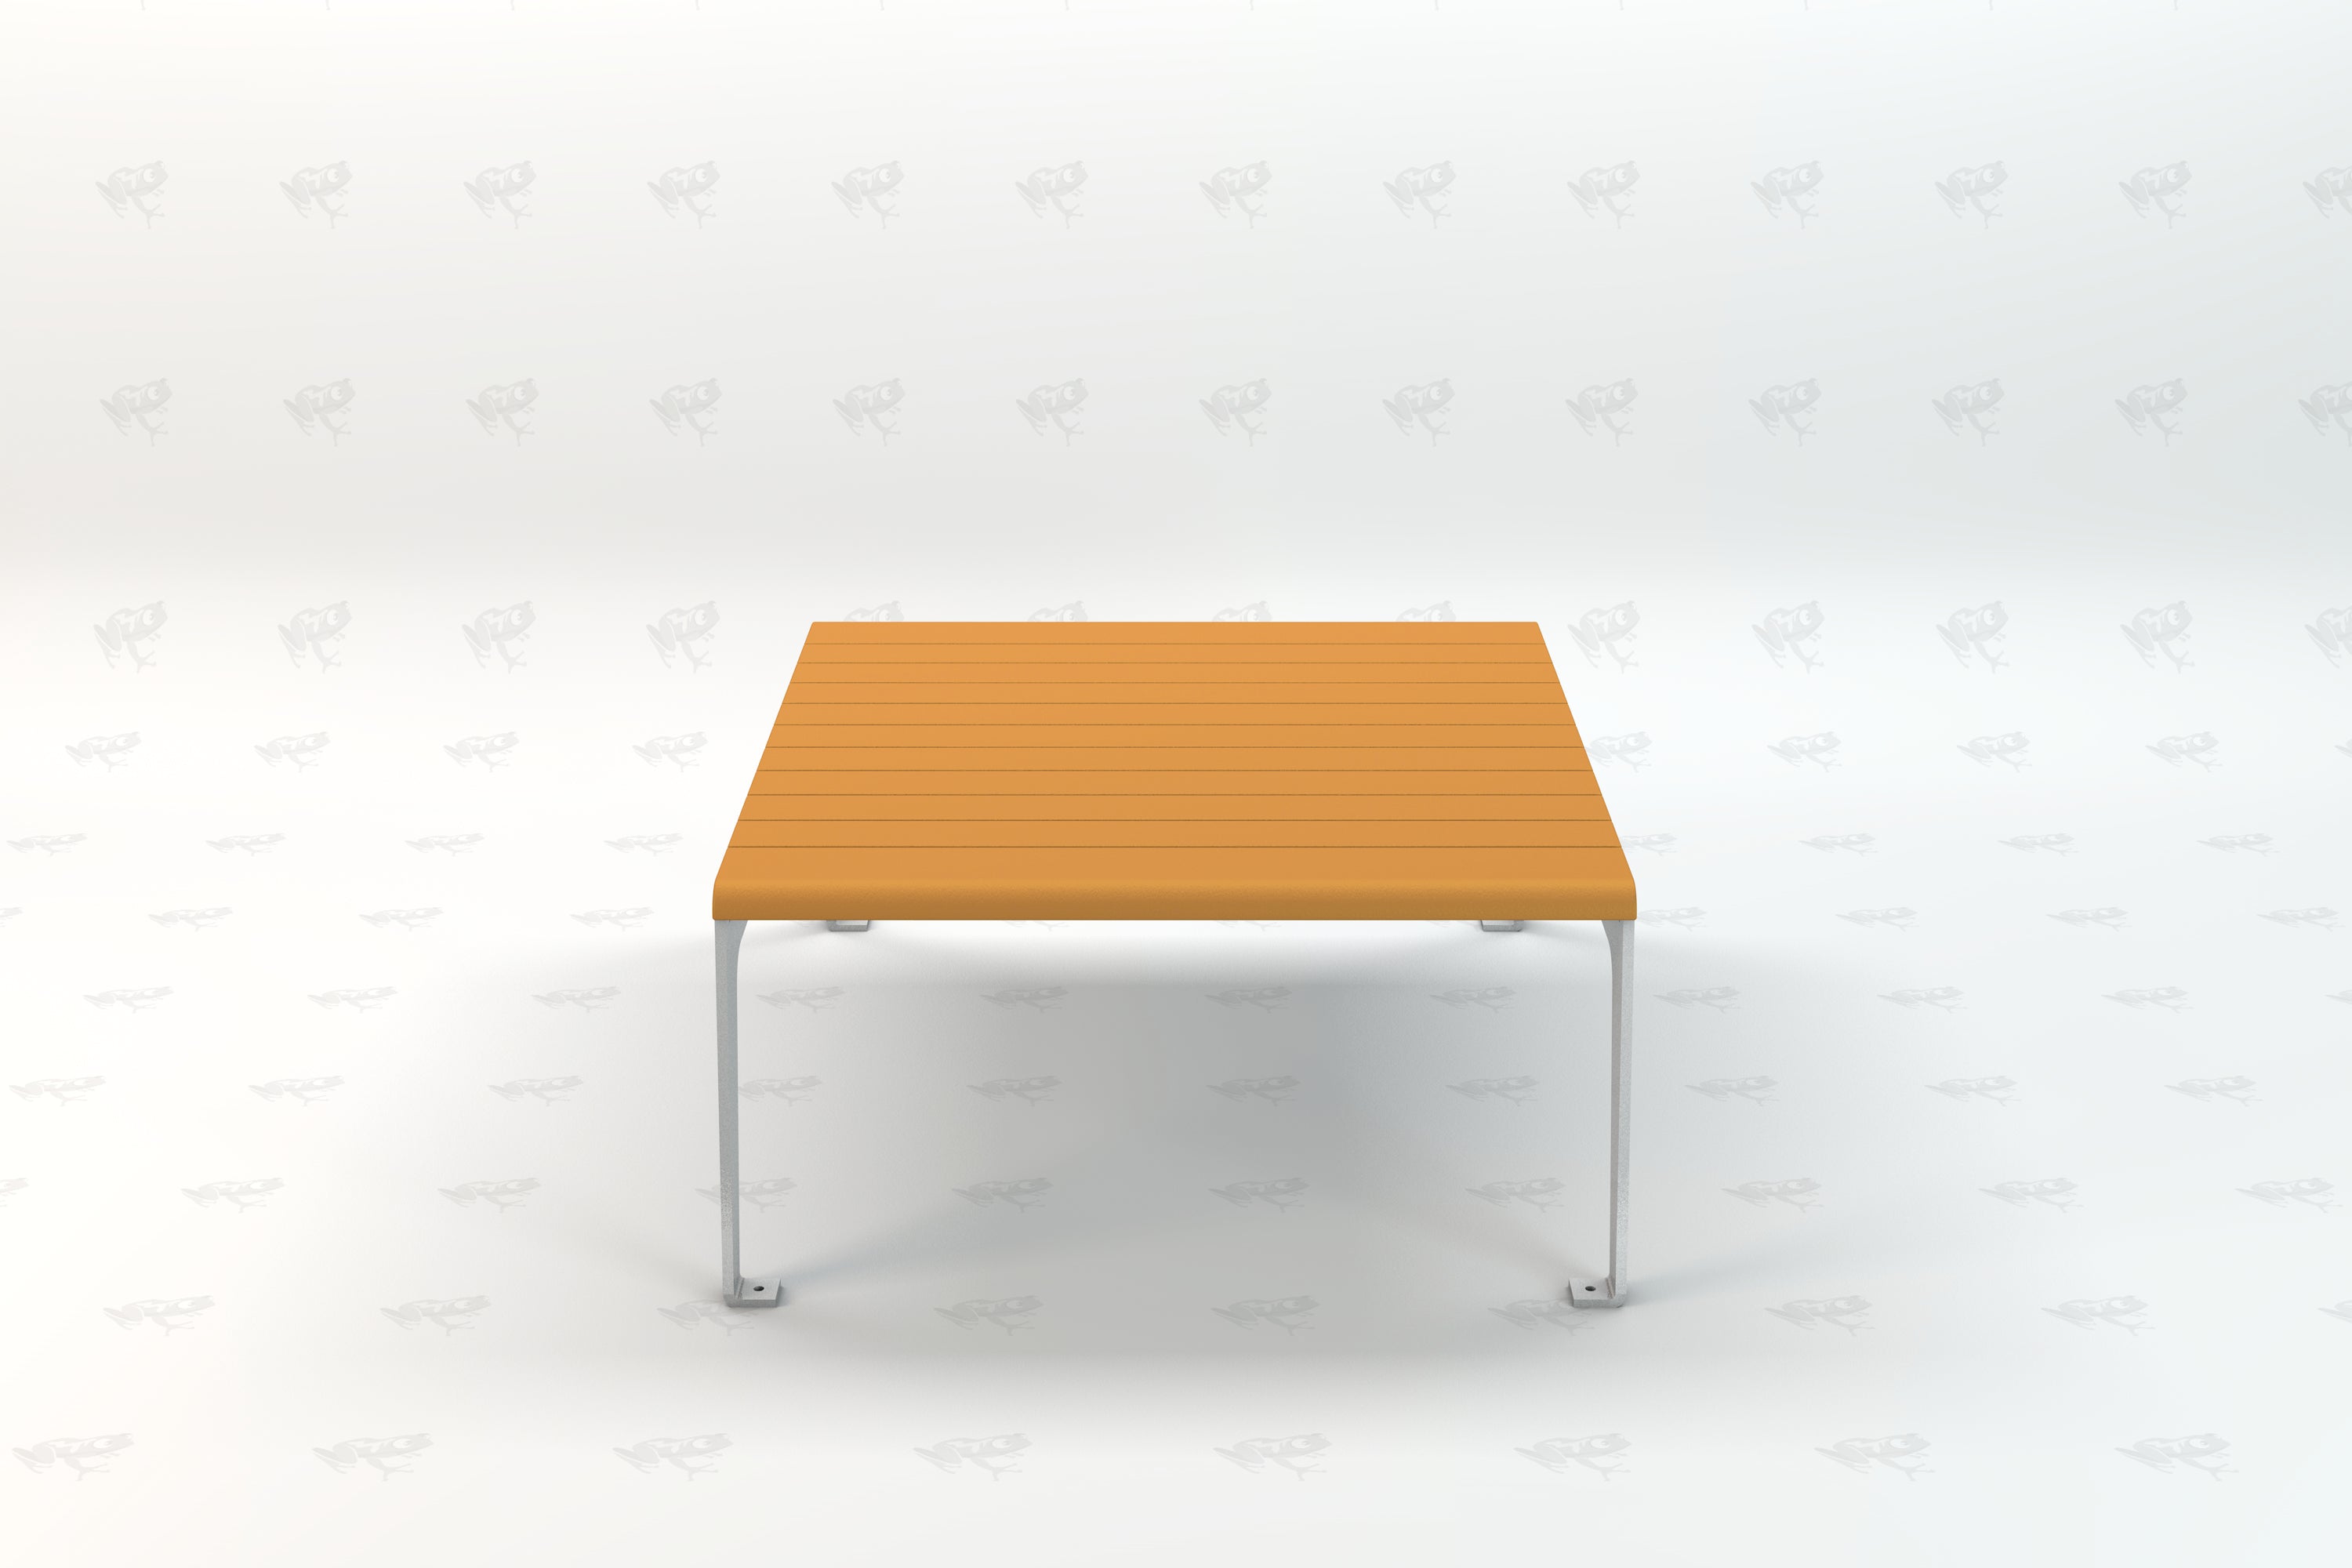 Plaza Recycled Plastic Outdoor Table